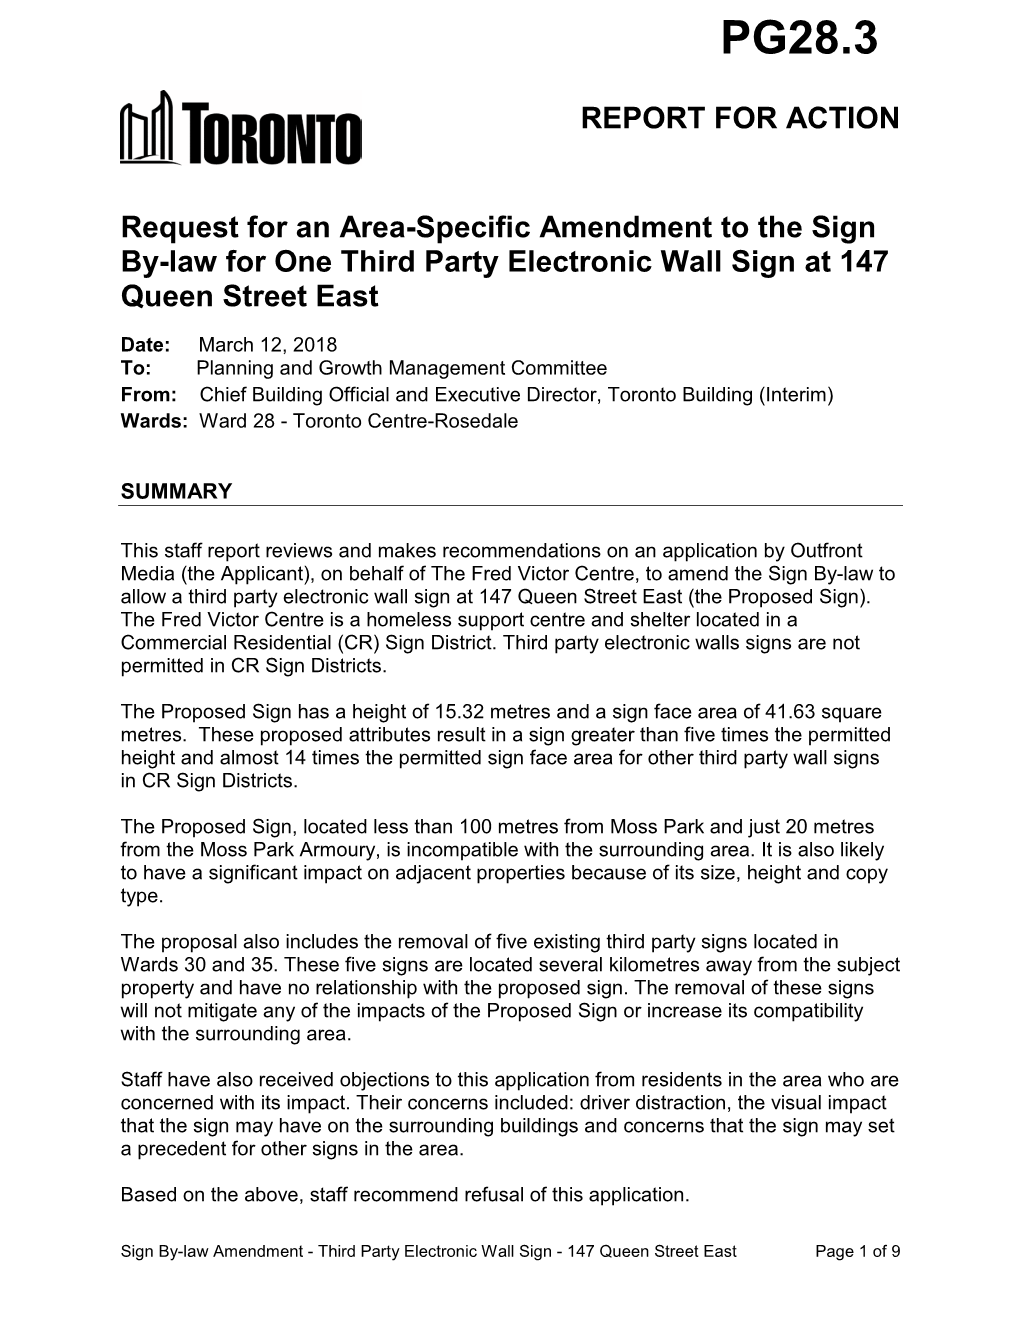 Request for an Area-Specific Amendment to the Sign By-Law for One Third Party Electronic Wall Sign at 147 Queen Street East